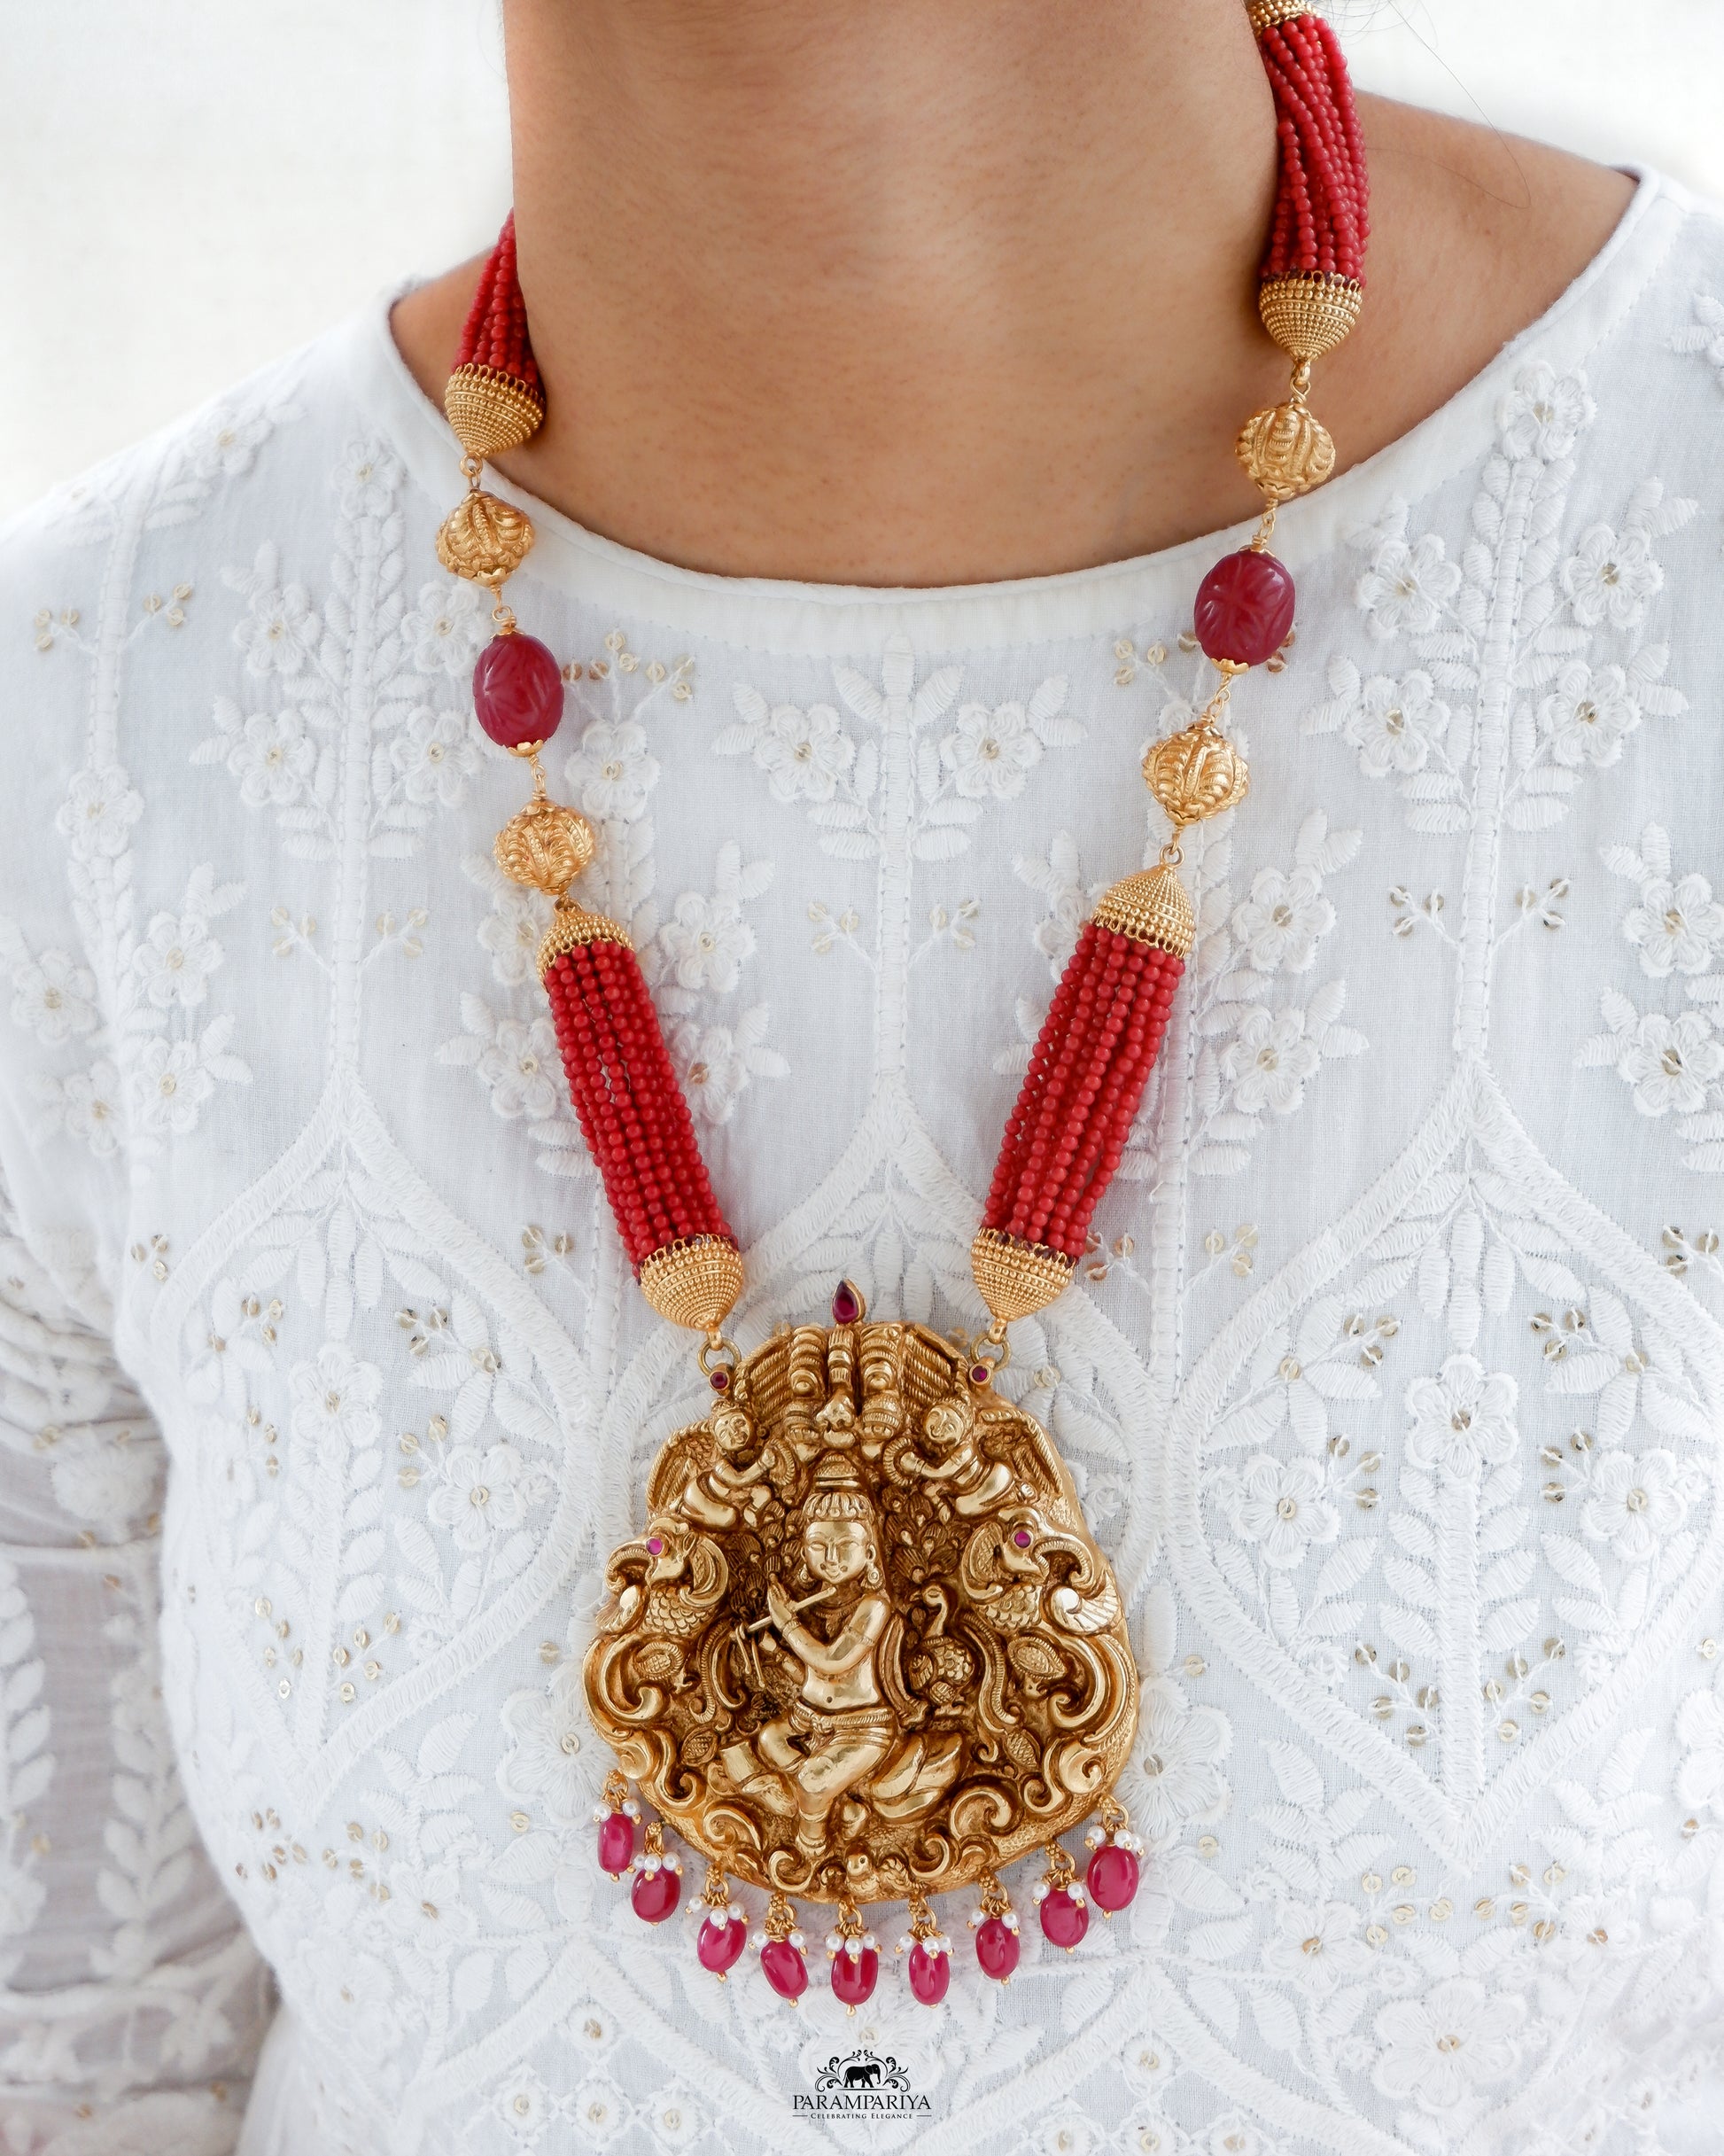 Uncover an artfully crafted unisex necklace adorned with an intricate charm of Lord Krishna and corals on www.parampariya.in. This exquisite jewel is made from pure silver and plated with antique gold microns for a beautiful finish.